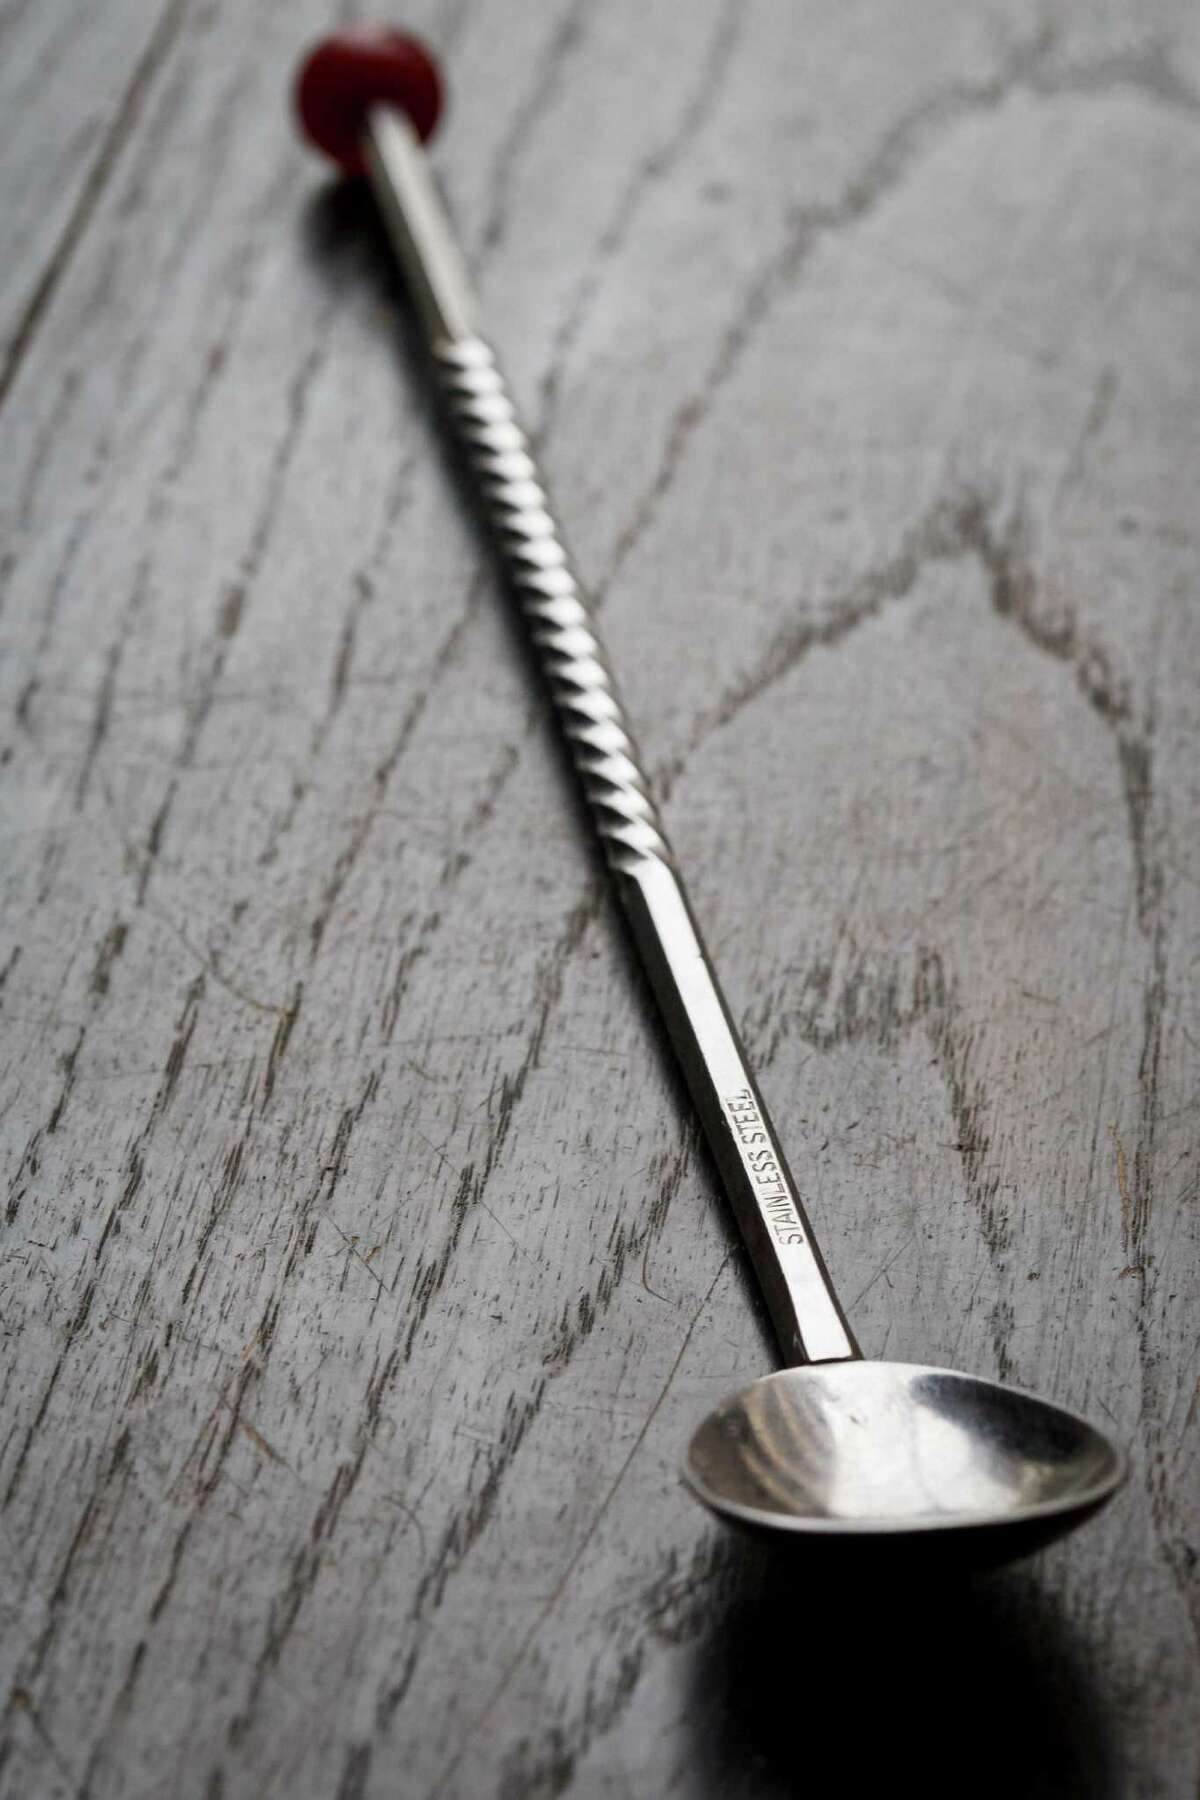 Bartender and owner Justin Burrow's favorite stirring spoon at Captain Foxheart's Bad News Bar & Spirit Lodge, Tuesday, April 2, 2013, in Houston. ( Michael Paulsen / Houston Chronicle )